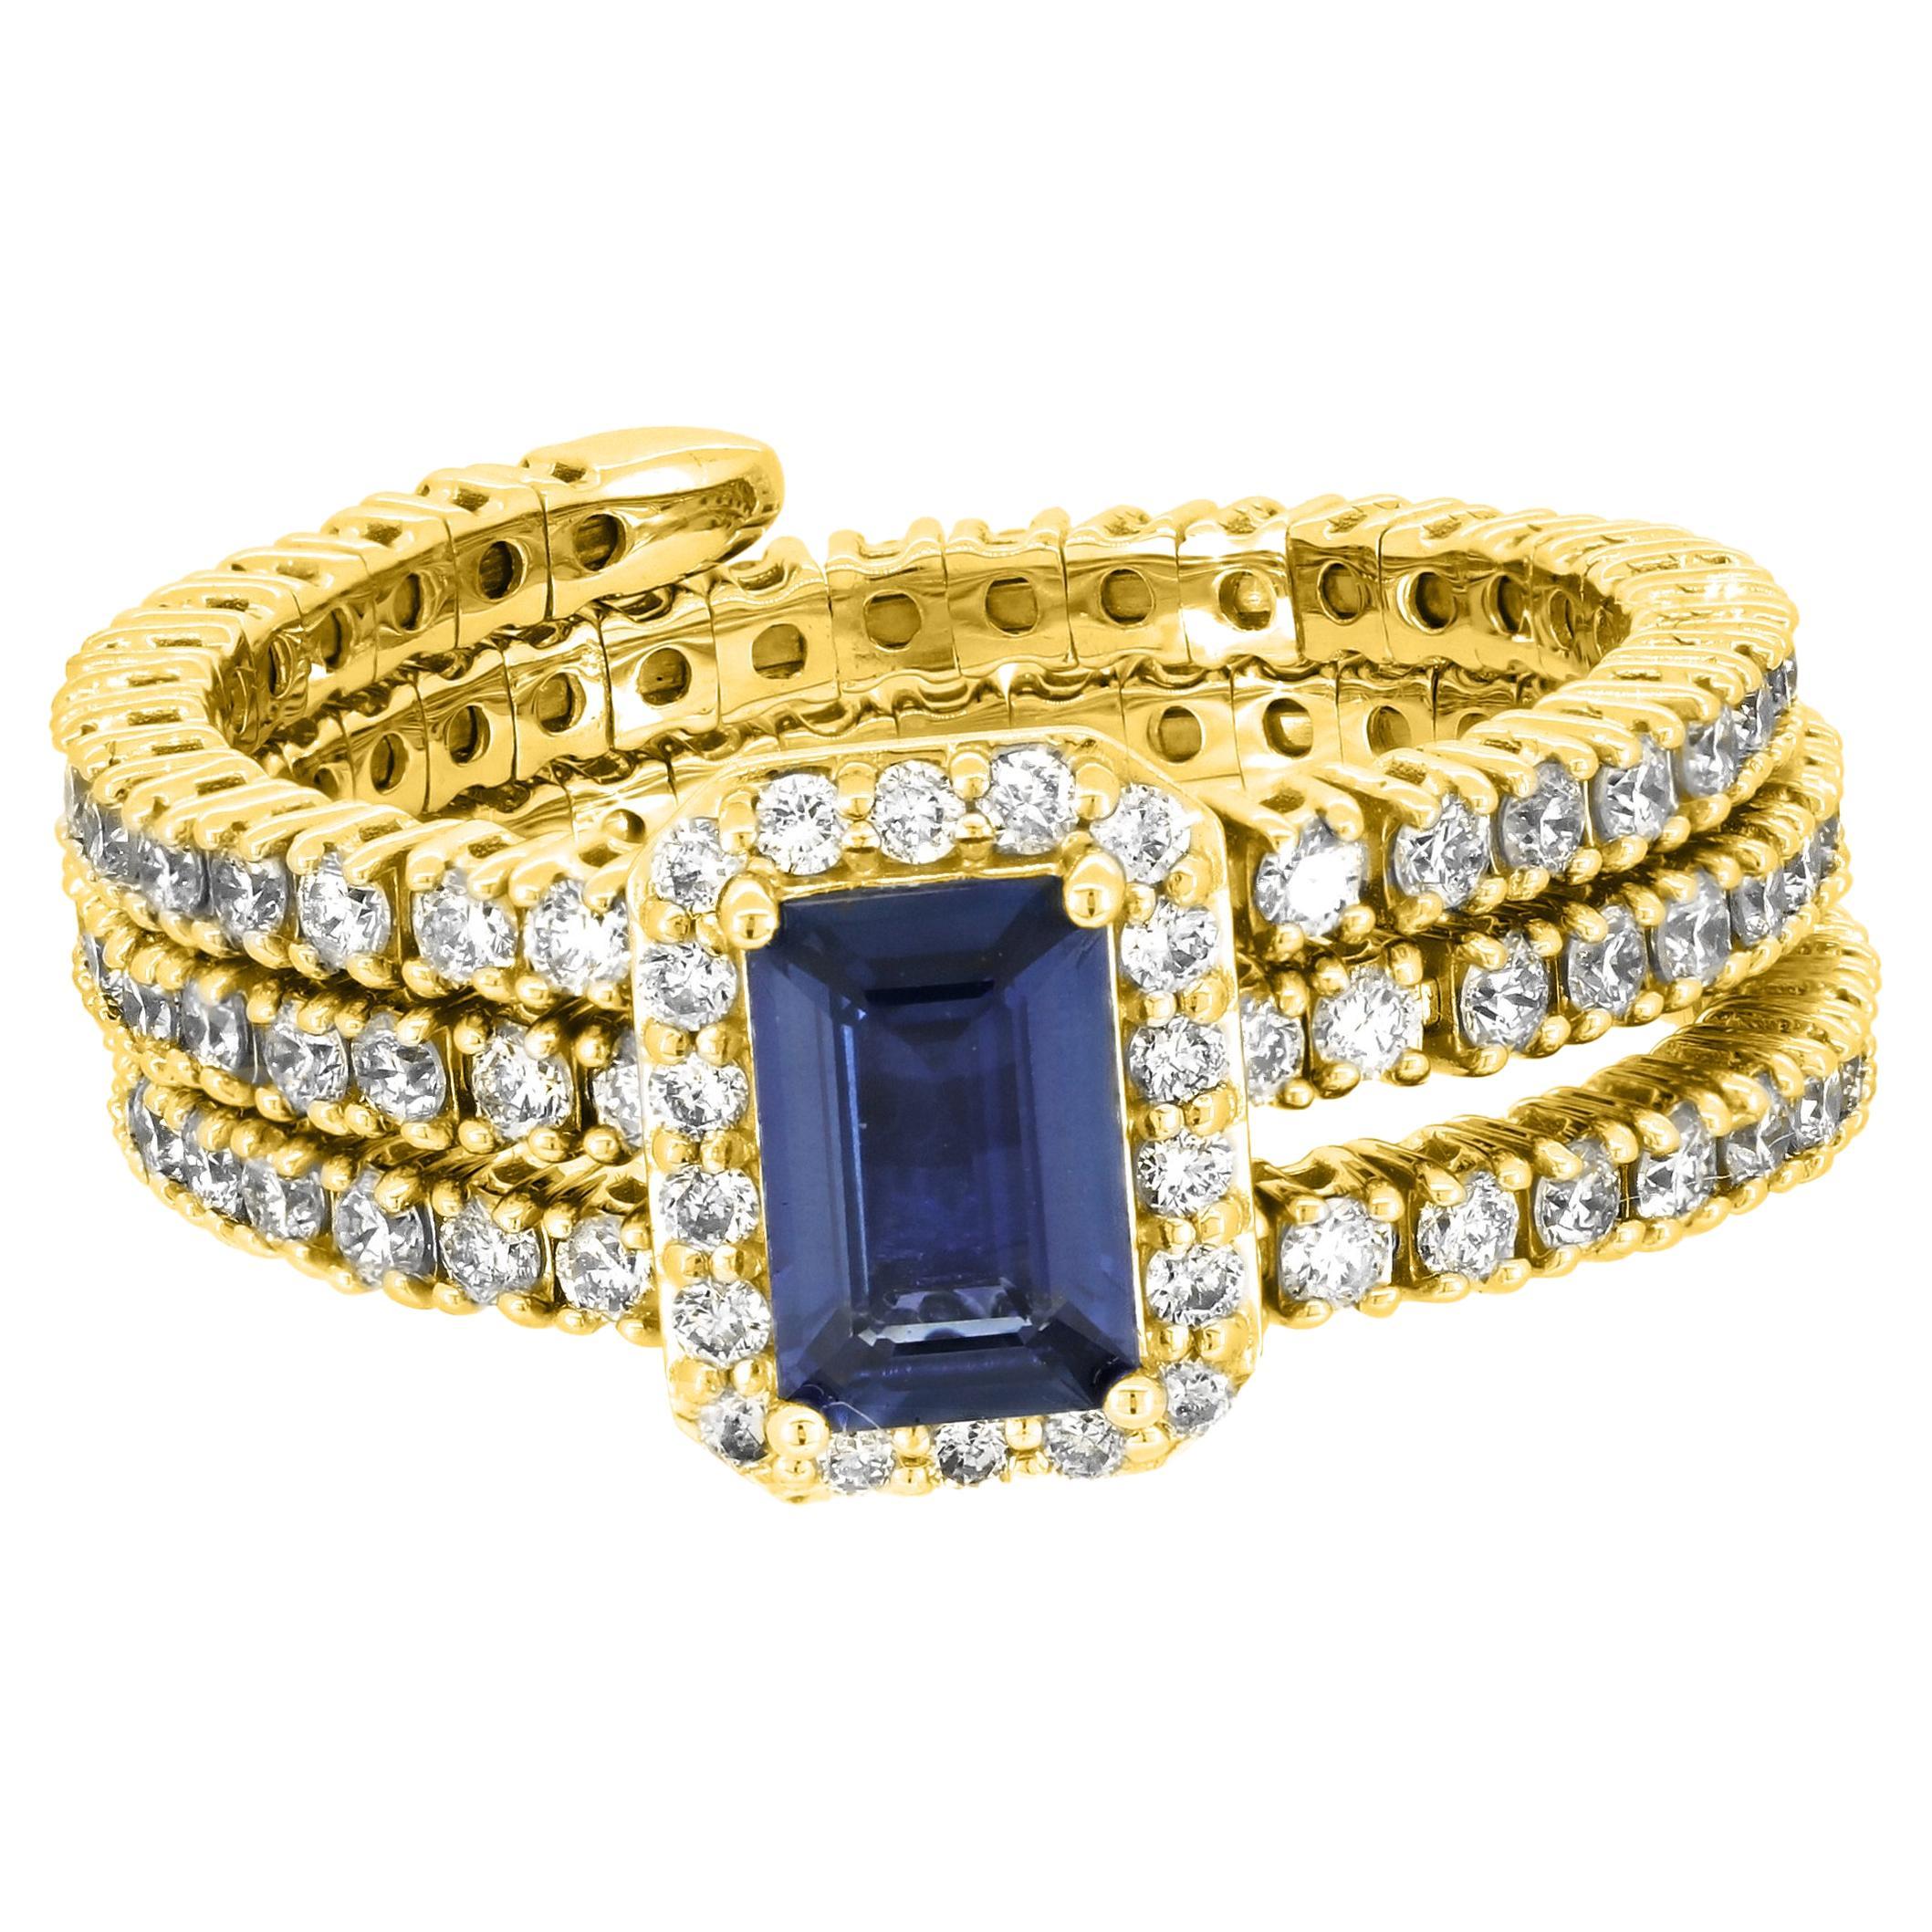 Gemistry 1.57cttw Blue Sapphire and Diamond Adjustable Ring in 18k Yellow Gold